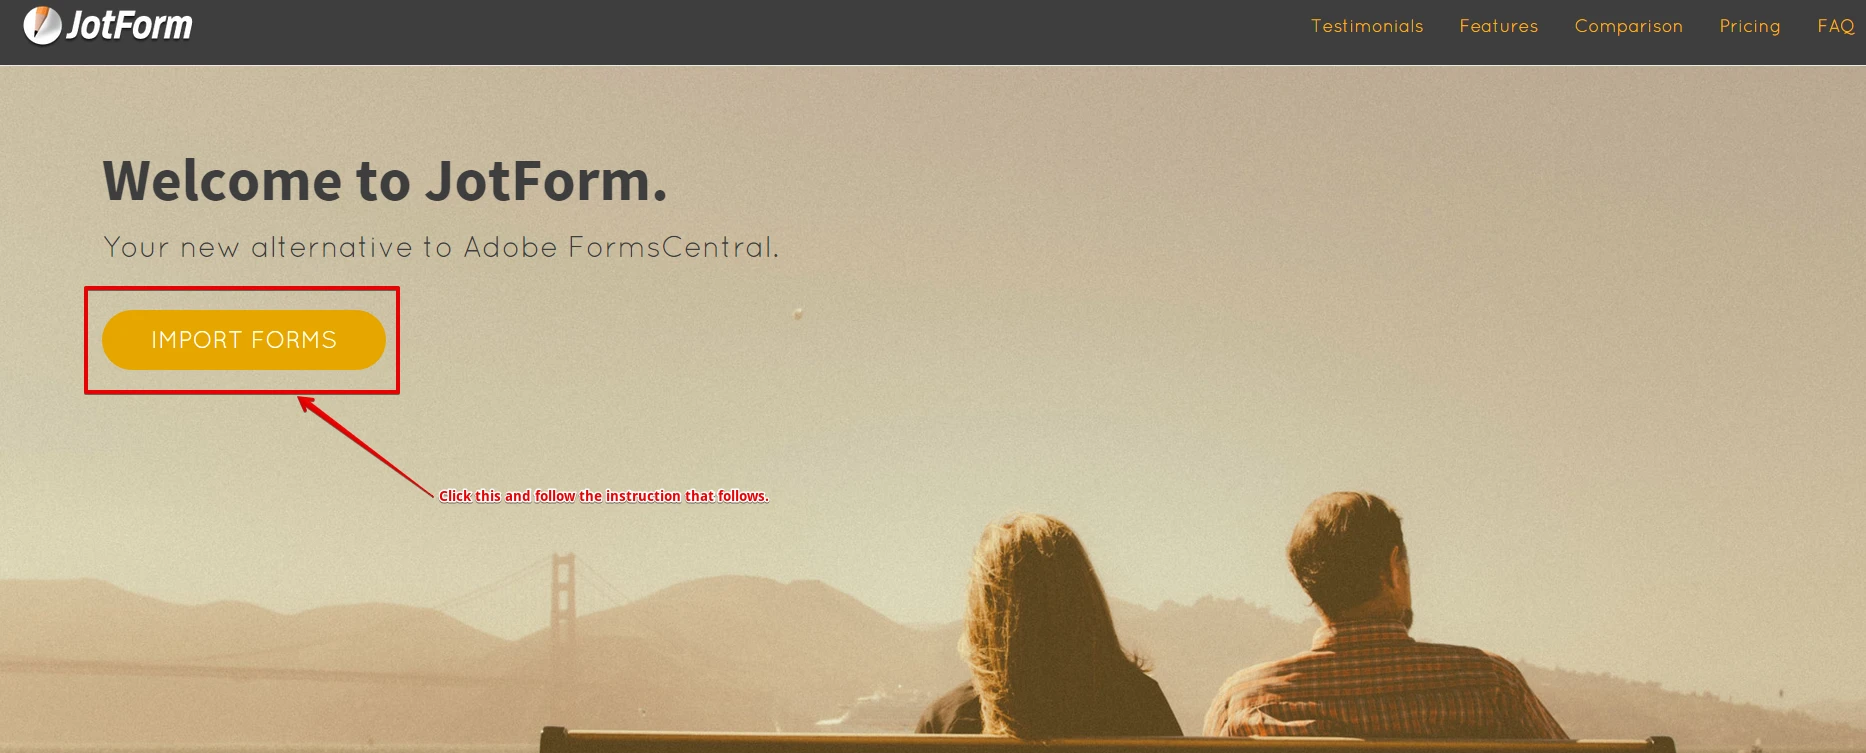 How to import a single form from Adobe FormsCentral to Jotform? Image 1 Screenshot 30